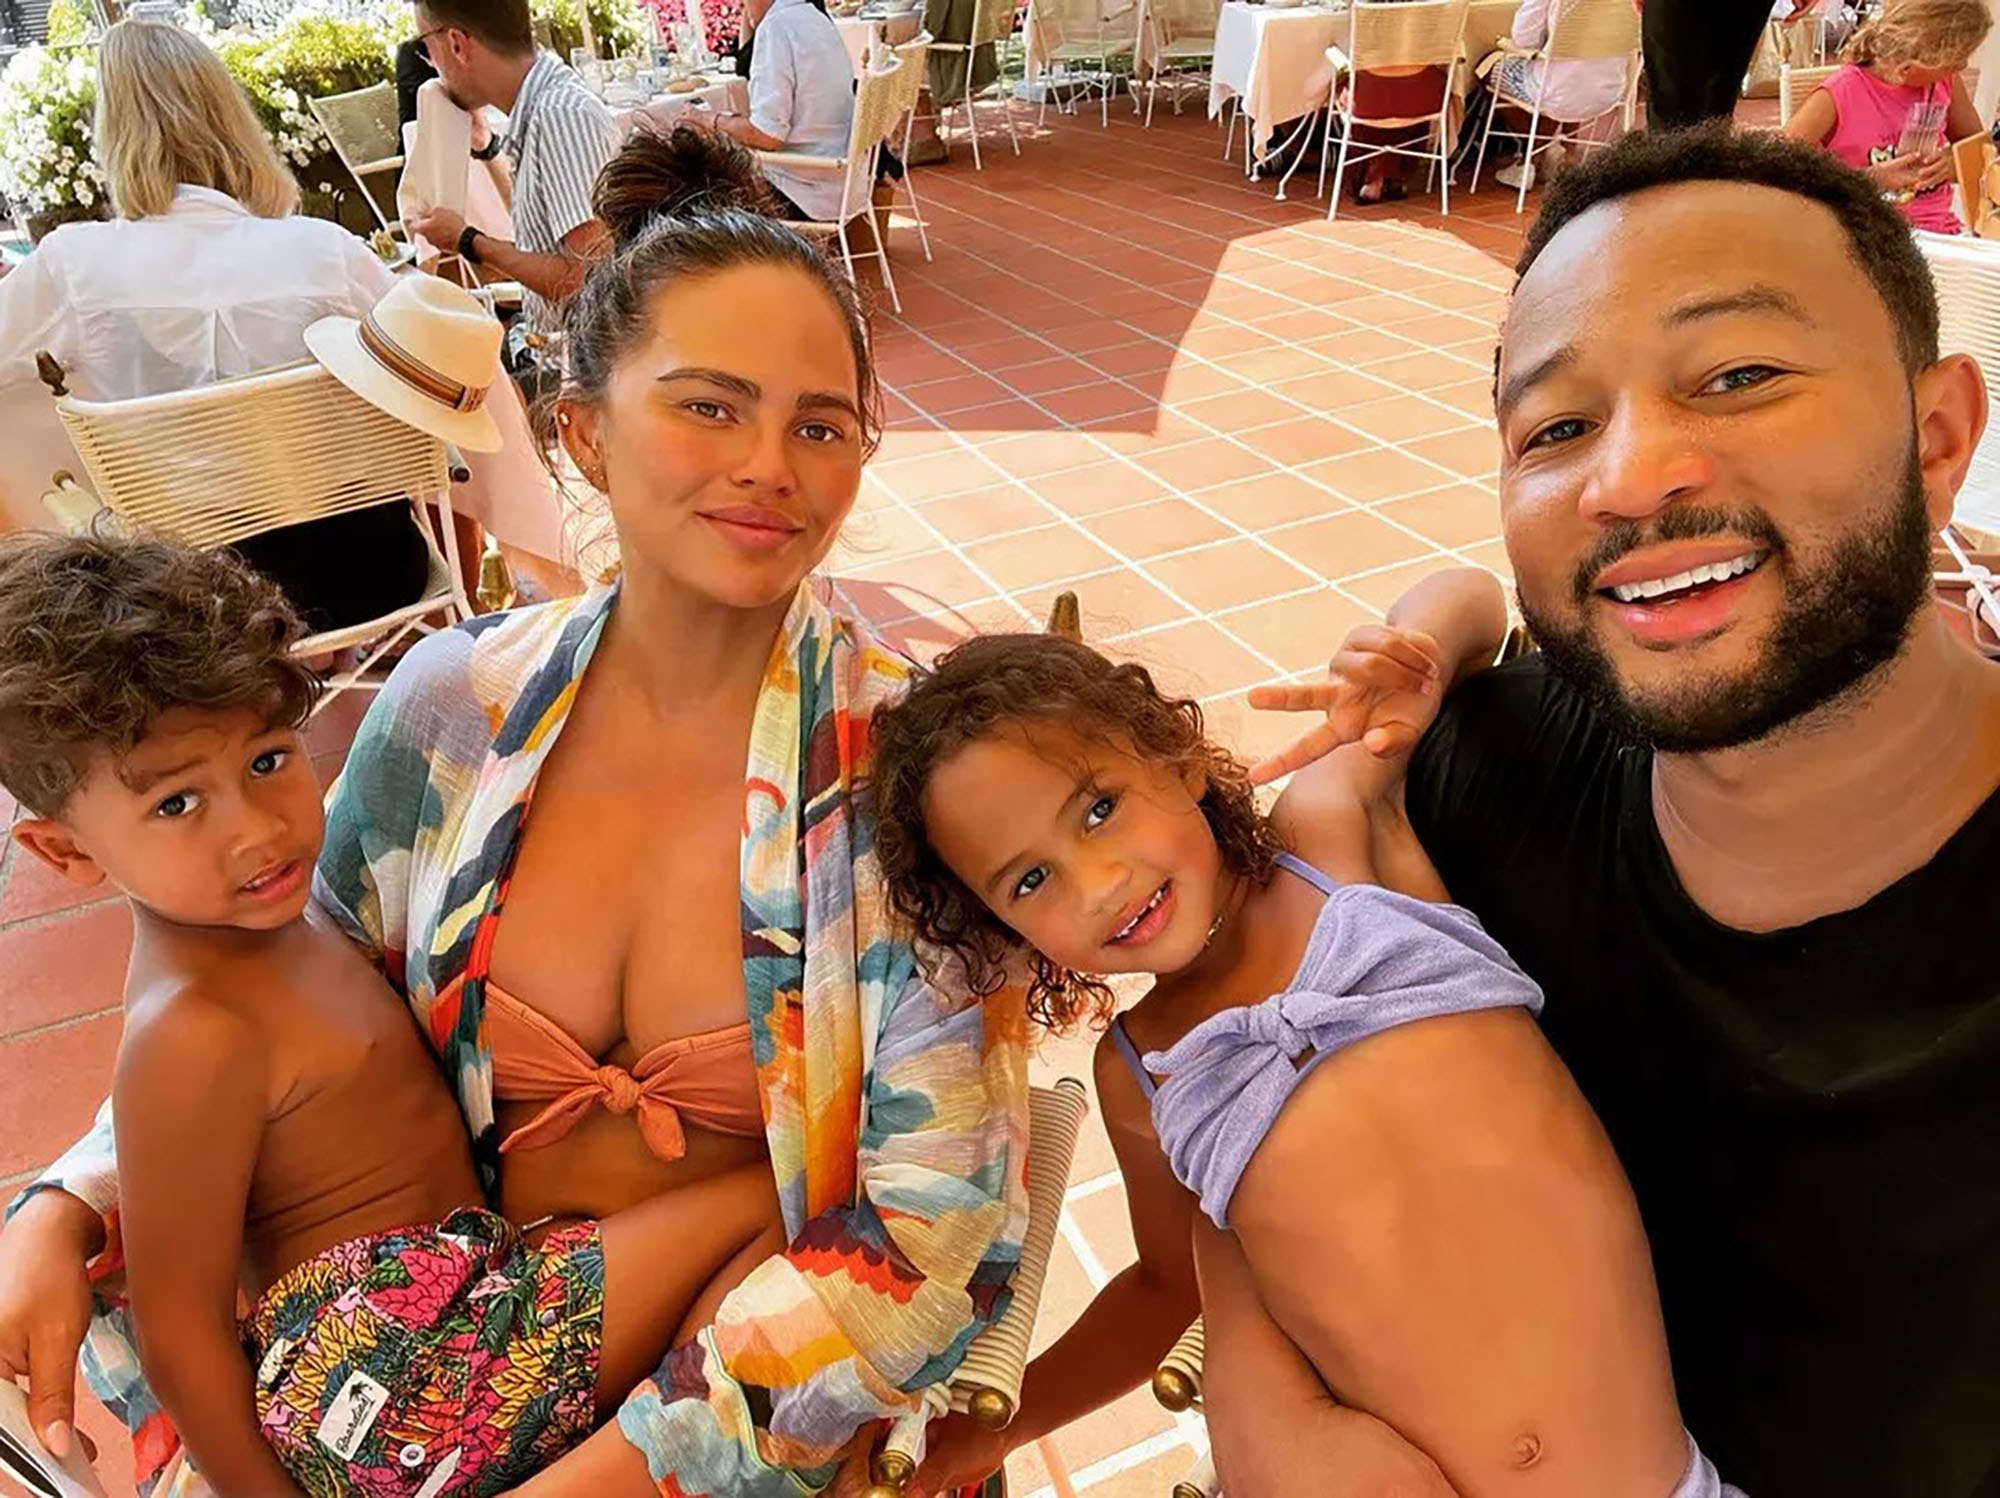 Chrissy Teigen and her changing face continue to enjoy vacation with her family